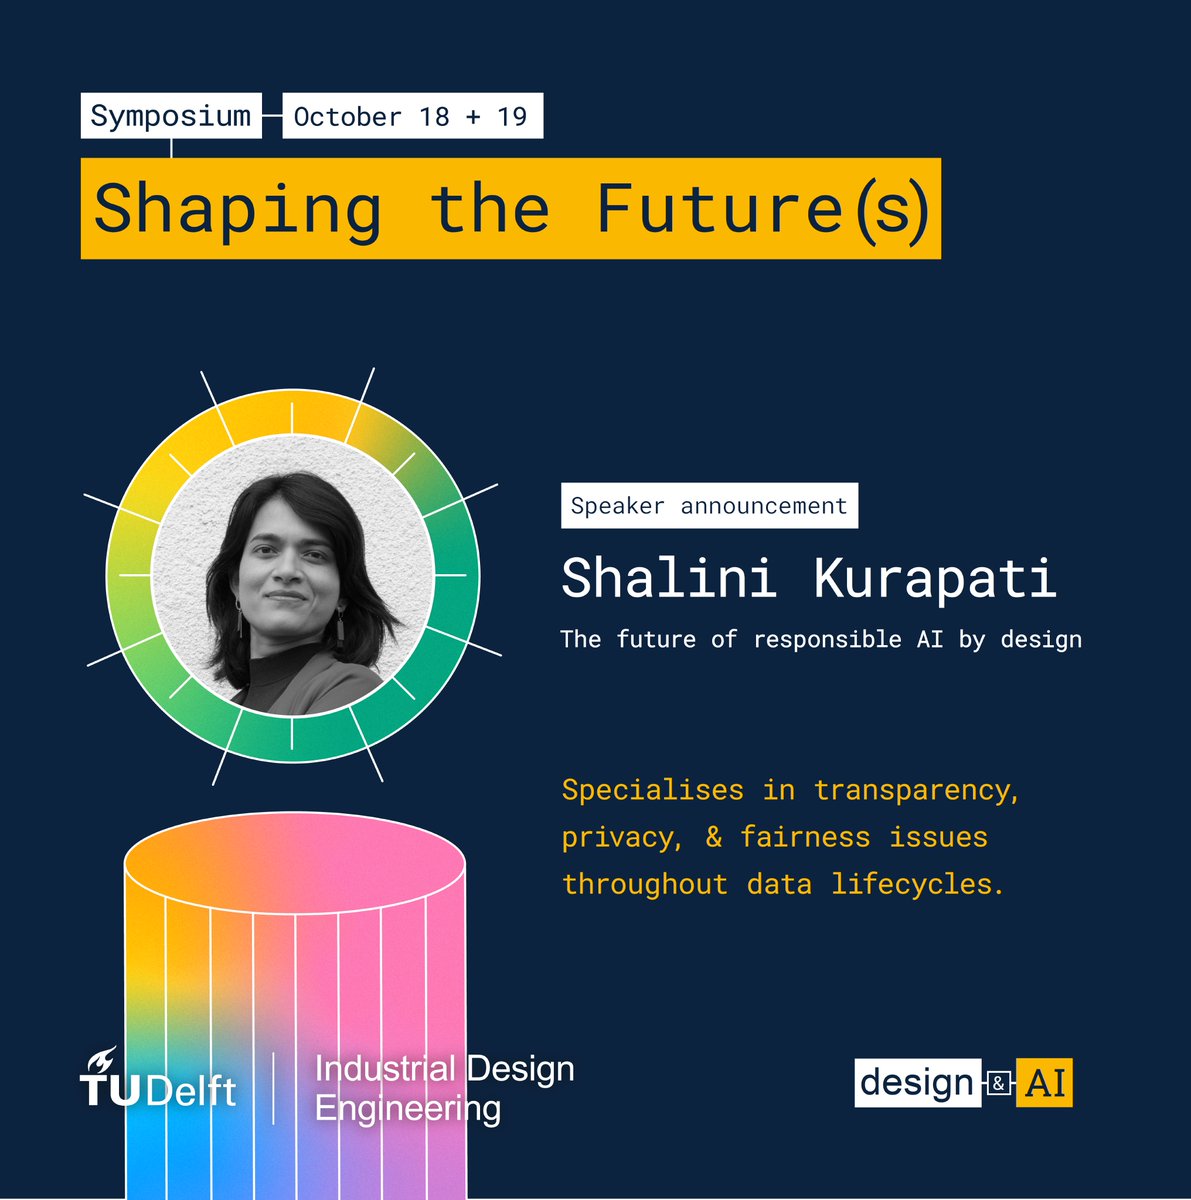 Announcing that Shalini Kurapati @shalini_kr, CEO at @ClearboxAI is a keynote speaker at the Design & AI Symposium, 18 and 19 October. Also meet Kyle McDonald, Elsje van Niekerk, Julian Bleecker - use the ‘SPEAKERS’ promo code for a discount #ai tudelft.nl/en/ide/news/co…